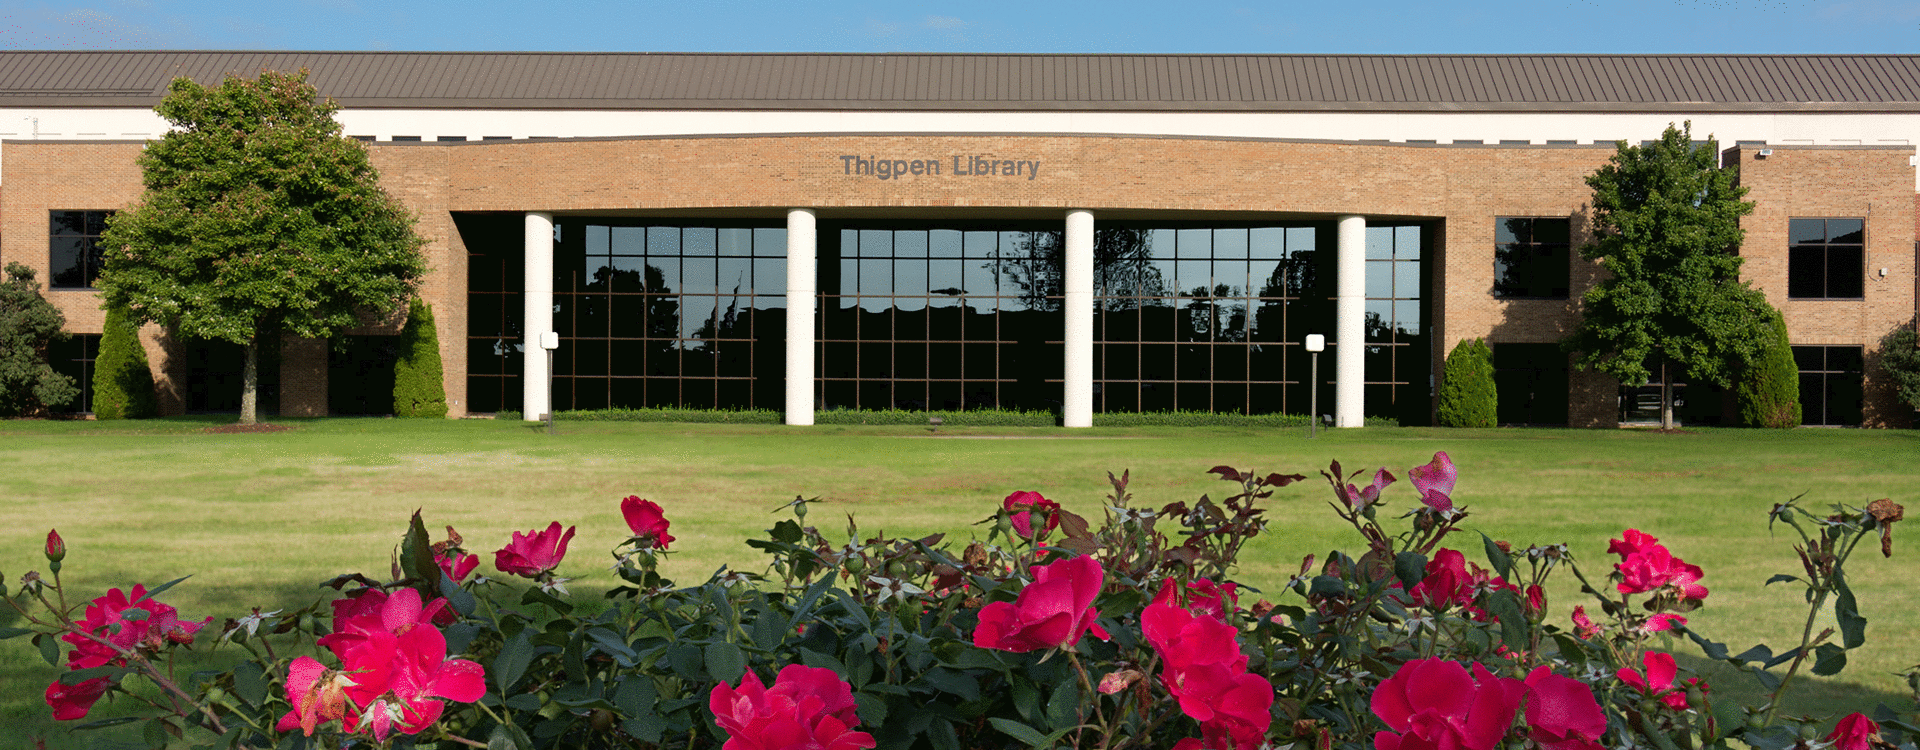 Thigpen Library